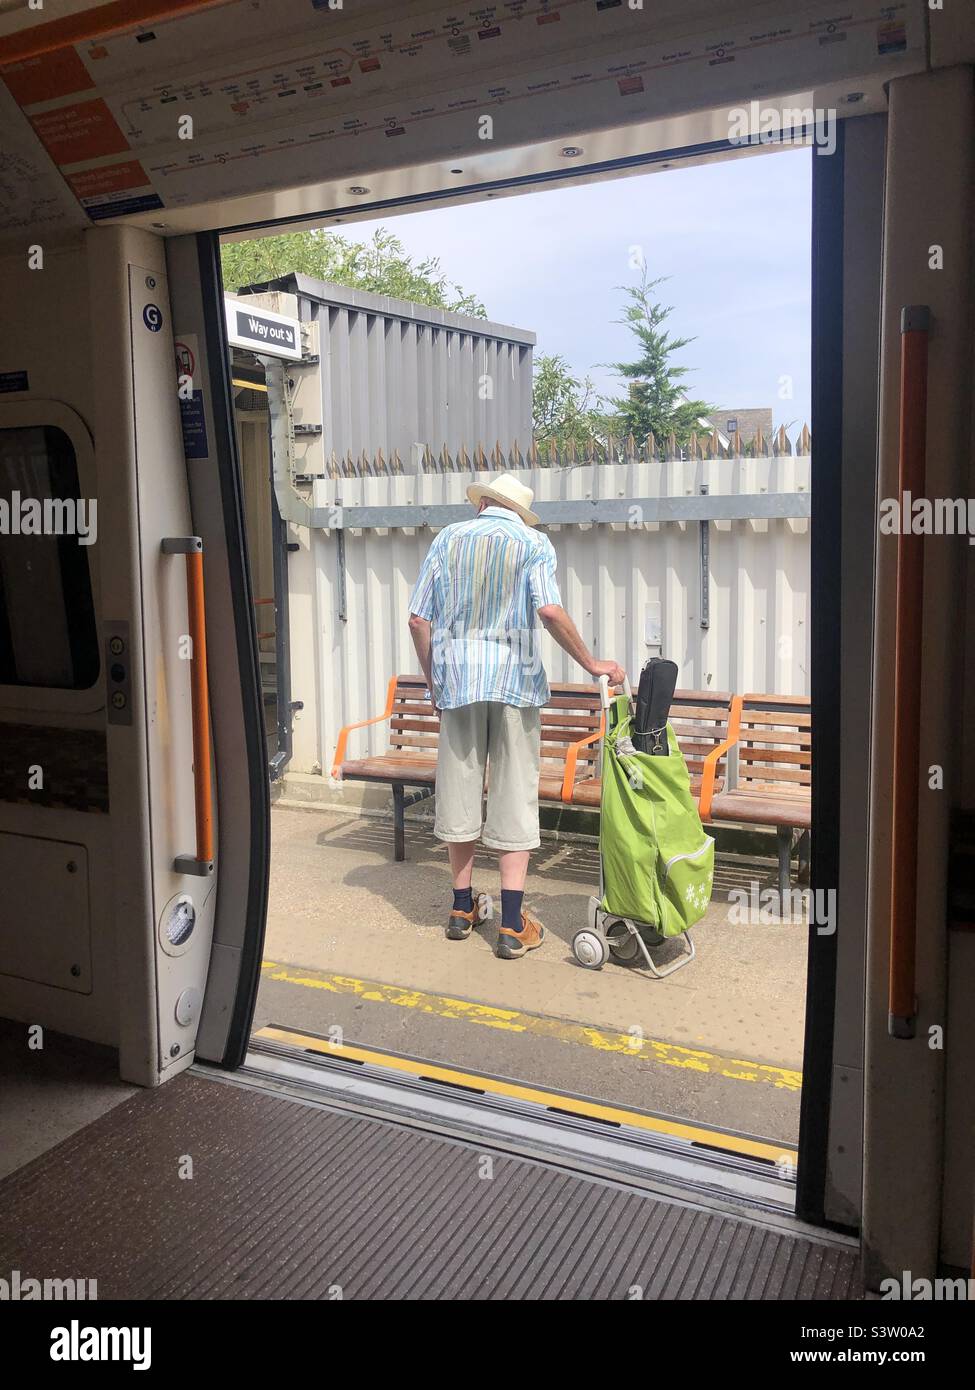 Man in summer outfit gets off from London overground train Stock Photo